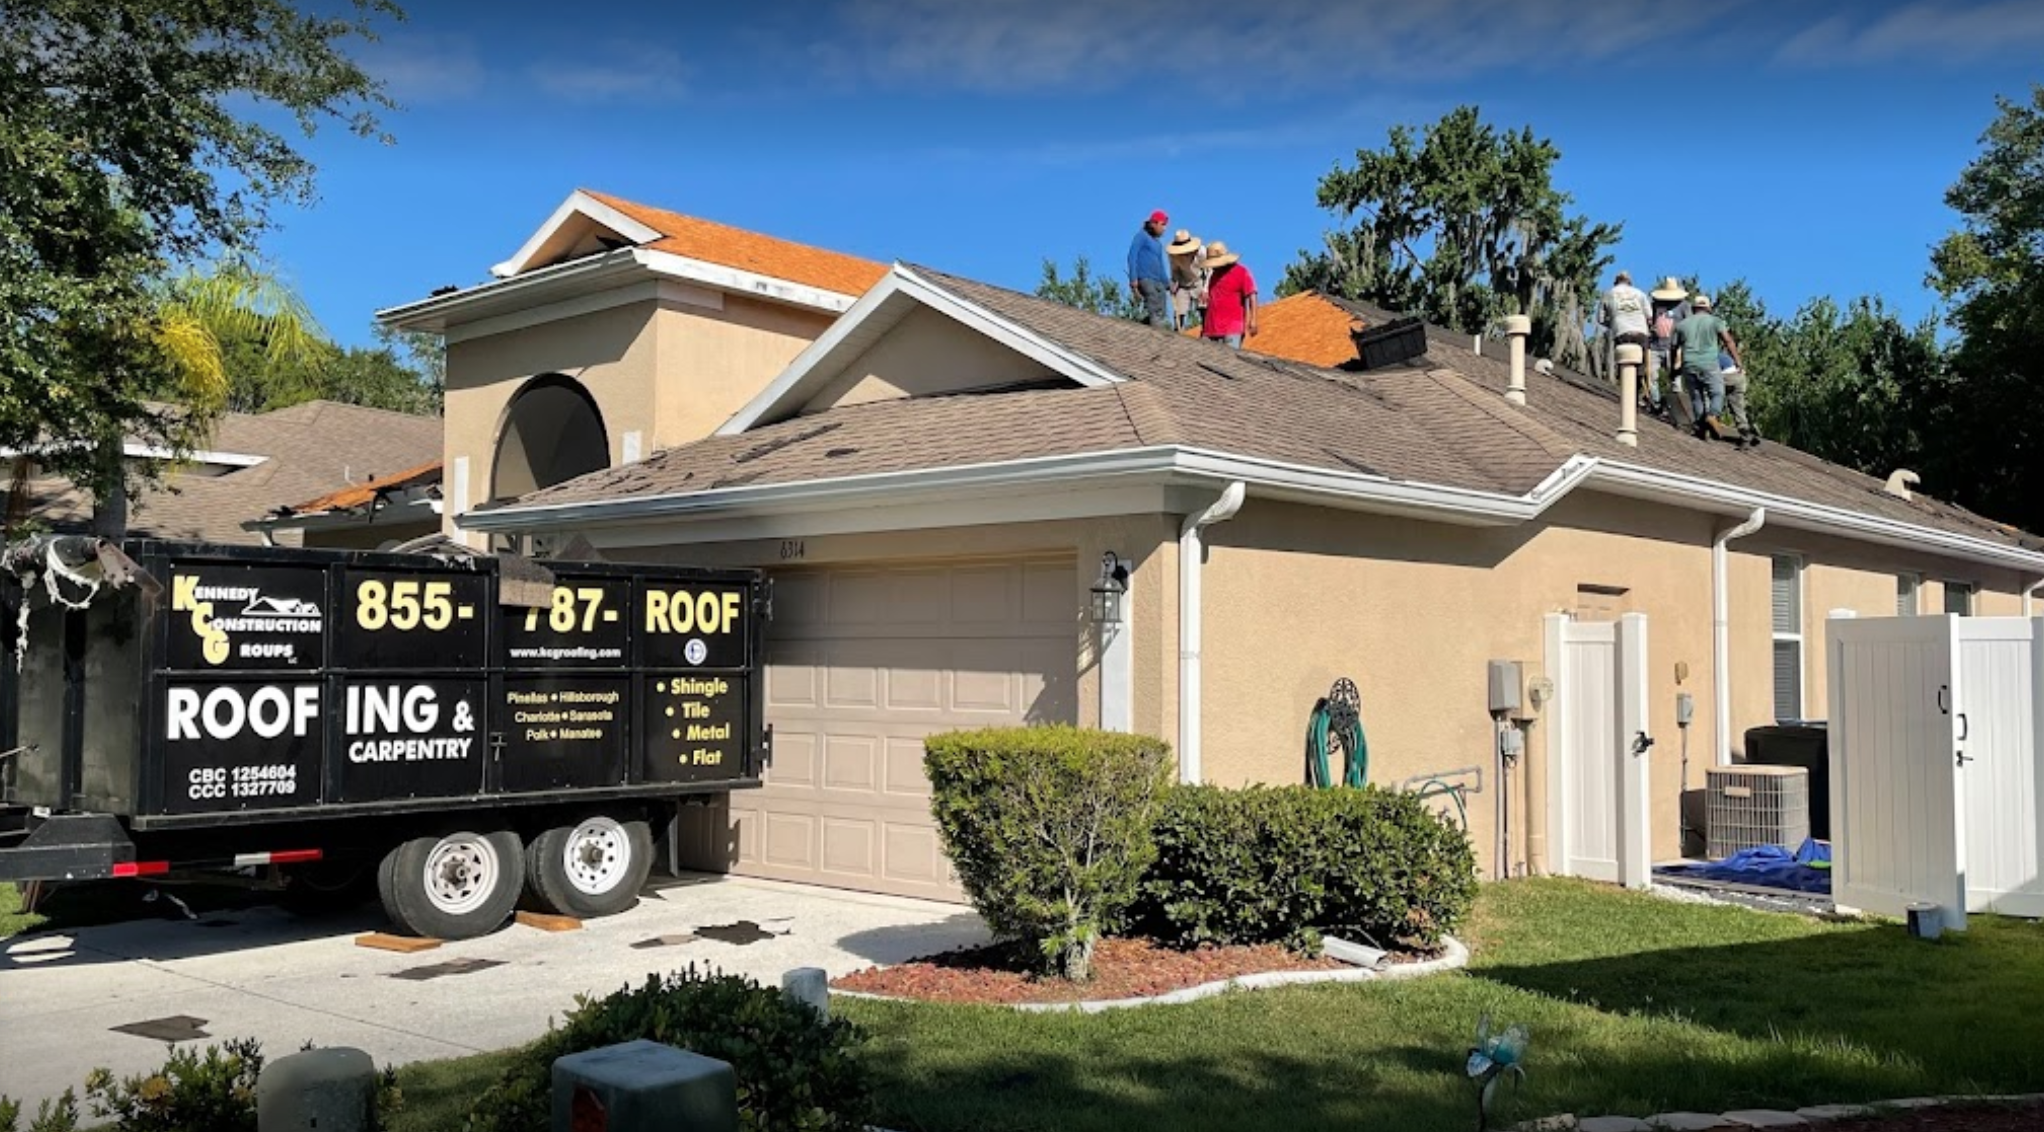 How Can I Tell if a Roofer is Legitimate?